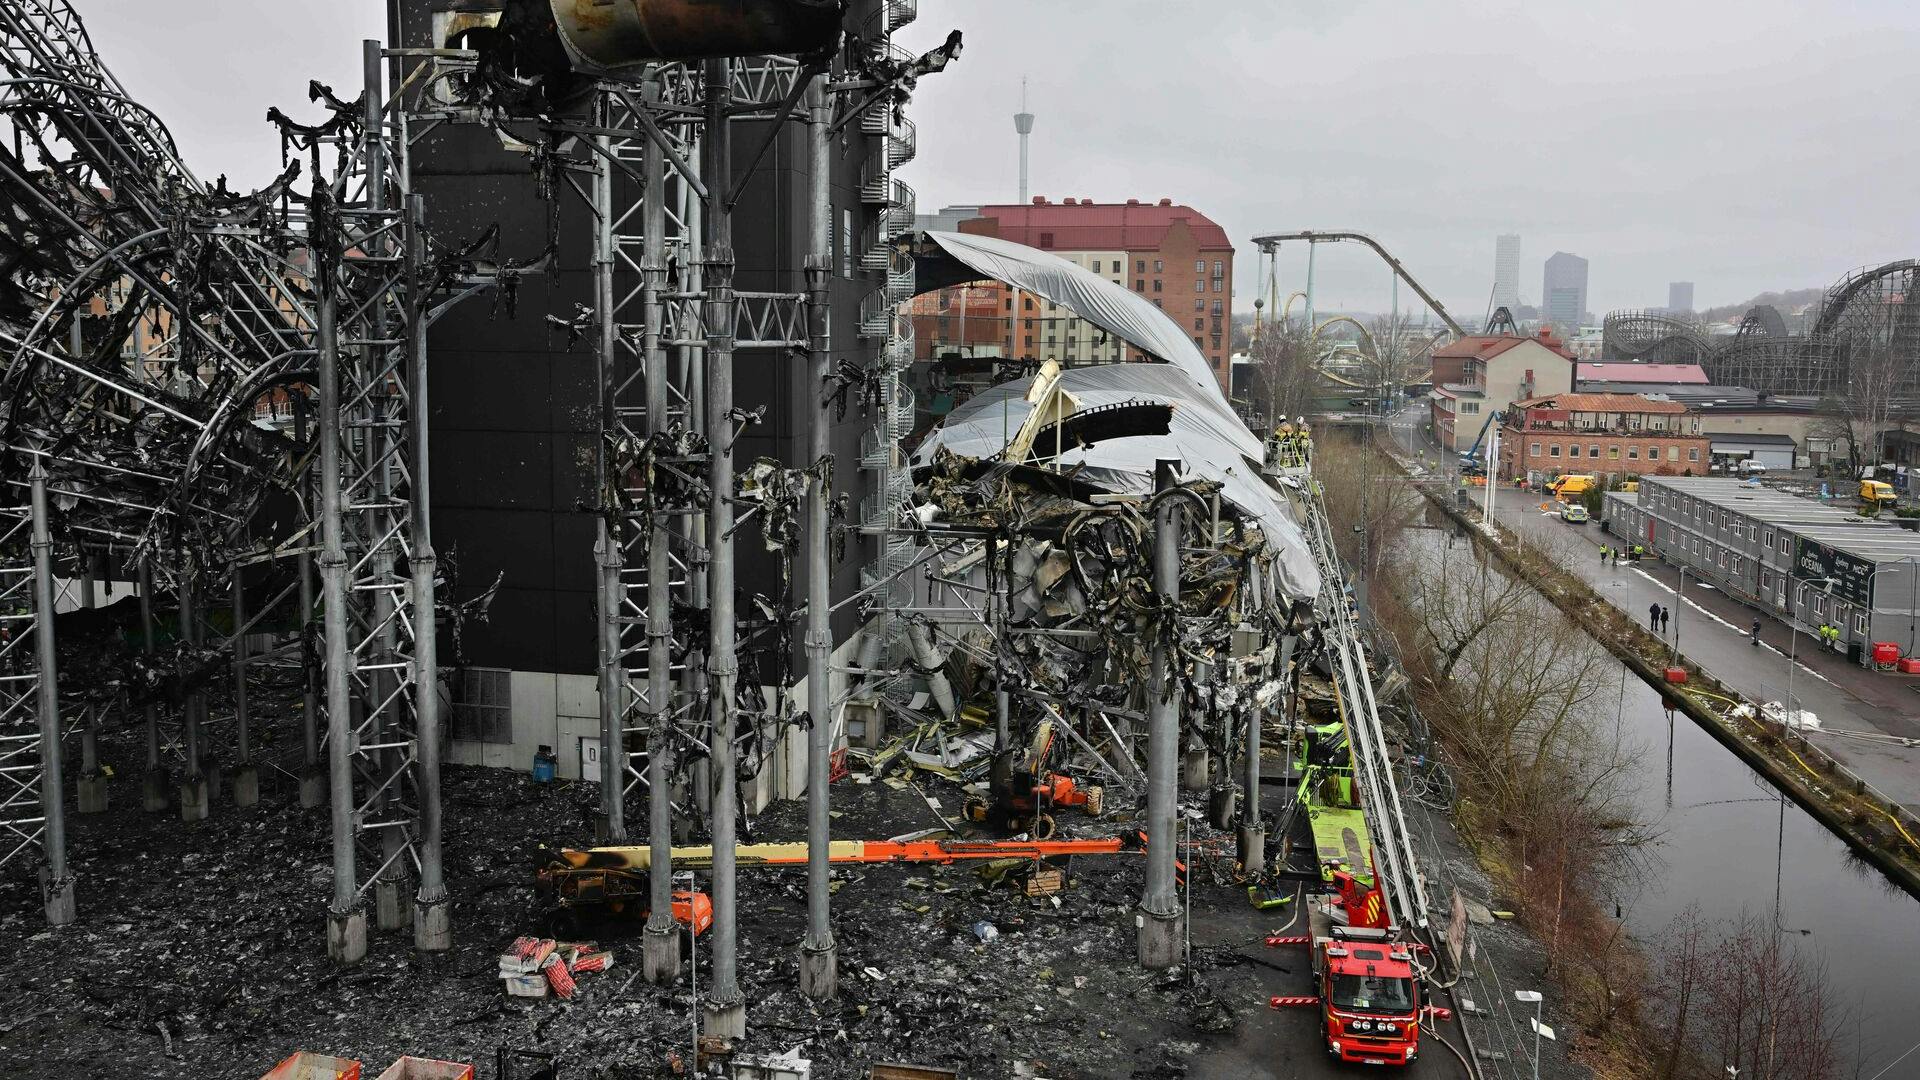 The rescue service works on February 15, 2024 at the burned-out Liseberg Oceana Water World in Gothenburg, after a large fire broke out on February 12, 2024 at the Liseberg amusement park. The Liseberg (Lisa's Mountain) amusement park opened in 1923 during Gothenburg's 300-year anniversary. Liseberg is one of the City of Gothenburg's municipal companies. (Photo by Bjorn LARSSON ROSVALL / TT News Agency / AFP) / Sweden OUT